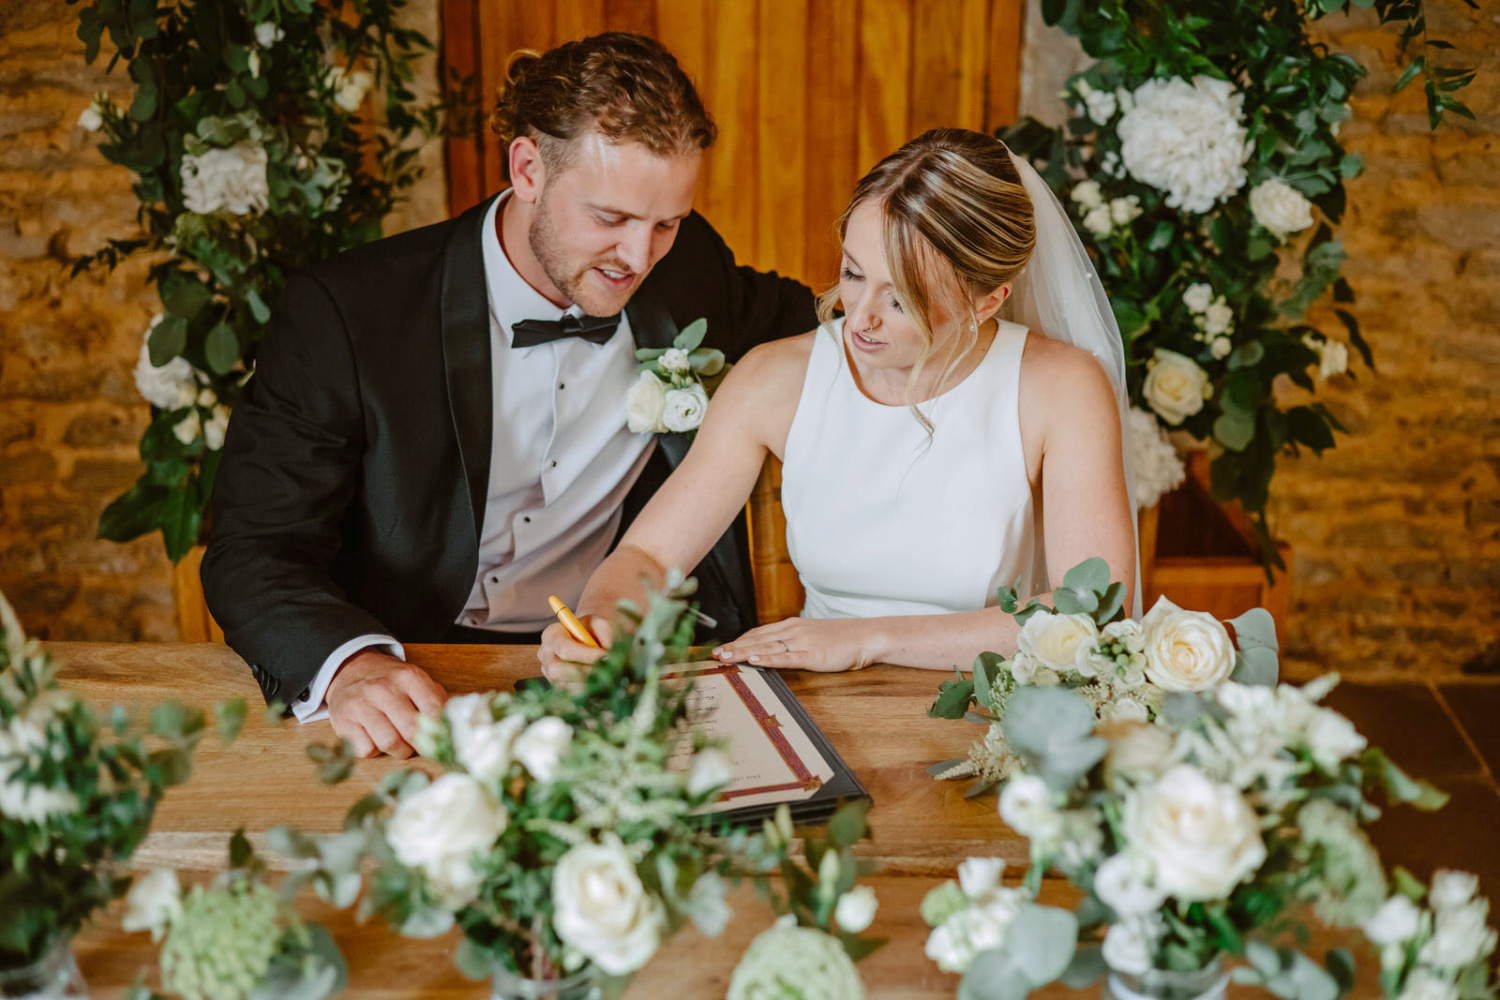 A bride and groom signing their wedding vows at a table at Stratton Court Barn.